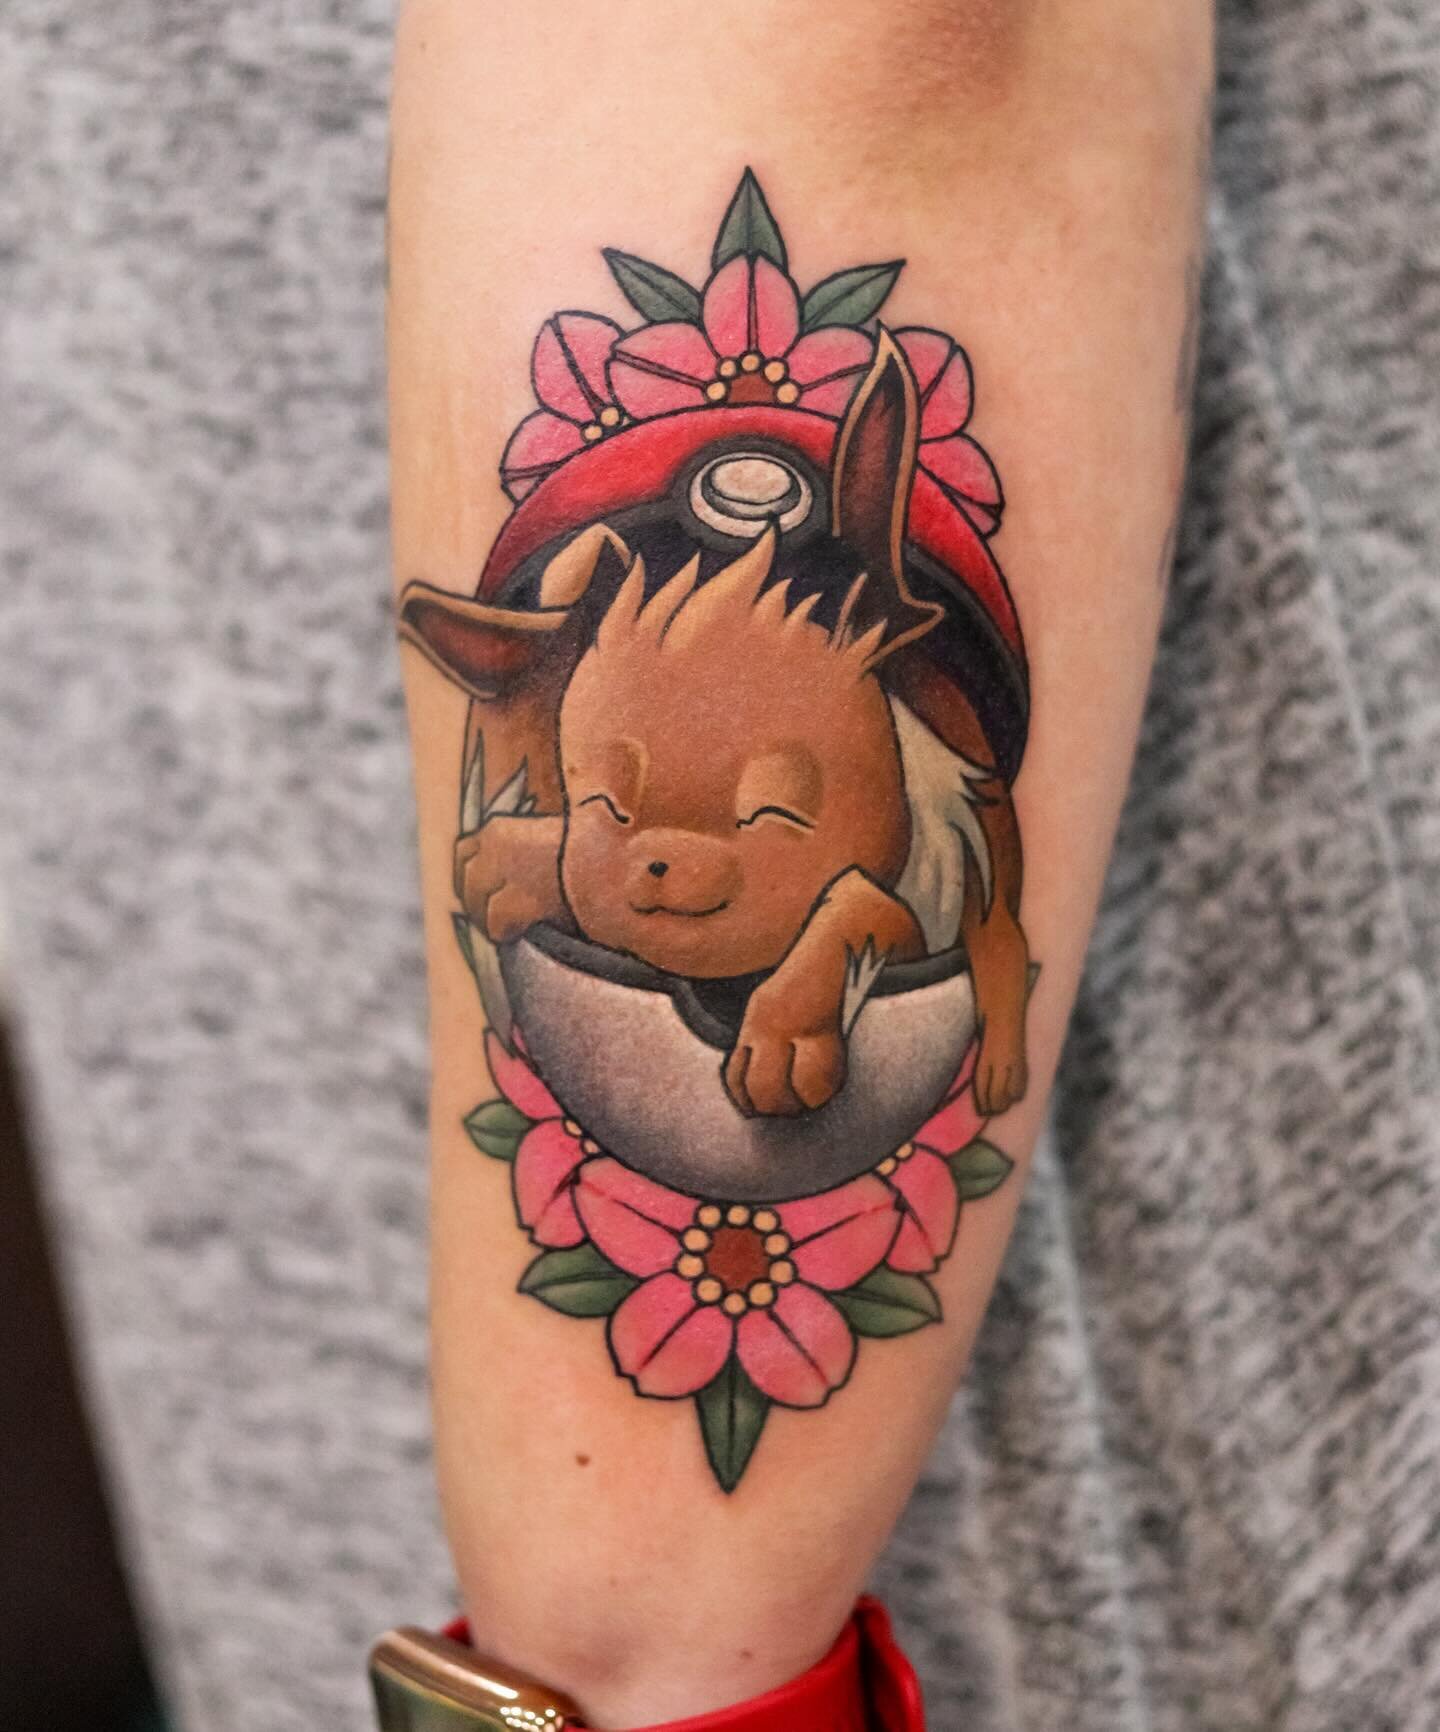 Eevee tattoo from predesigned drawings 🙏. Very grateful for the clients I have. 
More predrawn design available in my gallery and more coming soon. 
.
.
.
.
#pokemoncommunity #pokemontattoo #pokemontattoos #neotraditional #neotrad #neotraditionaltat